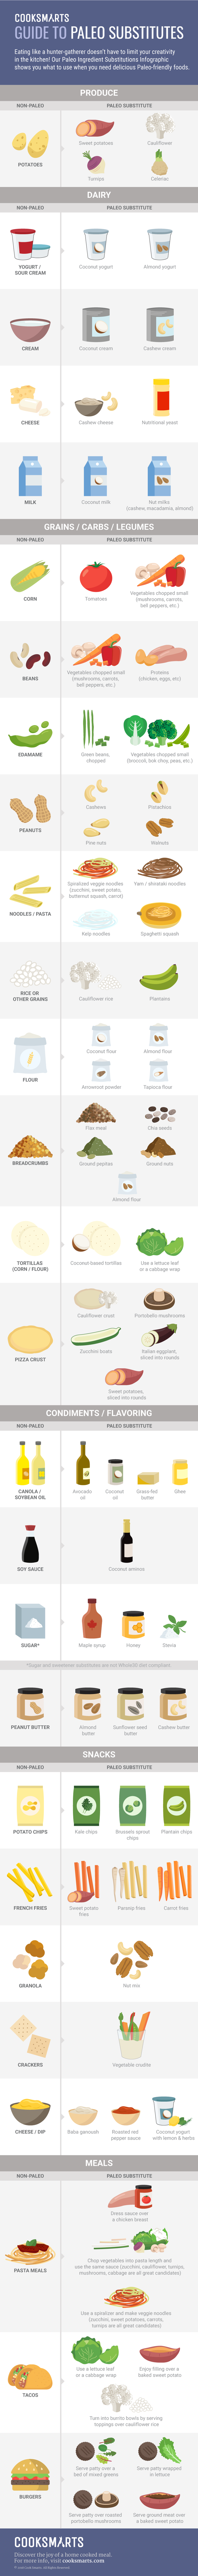 Guide to Paleo Substitutes Infographic | Cook Smarts